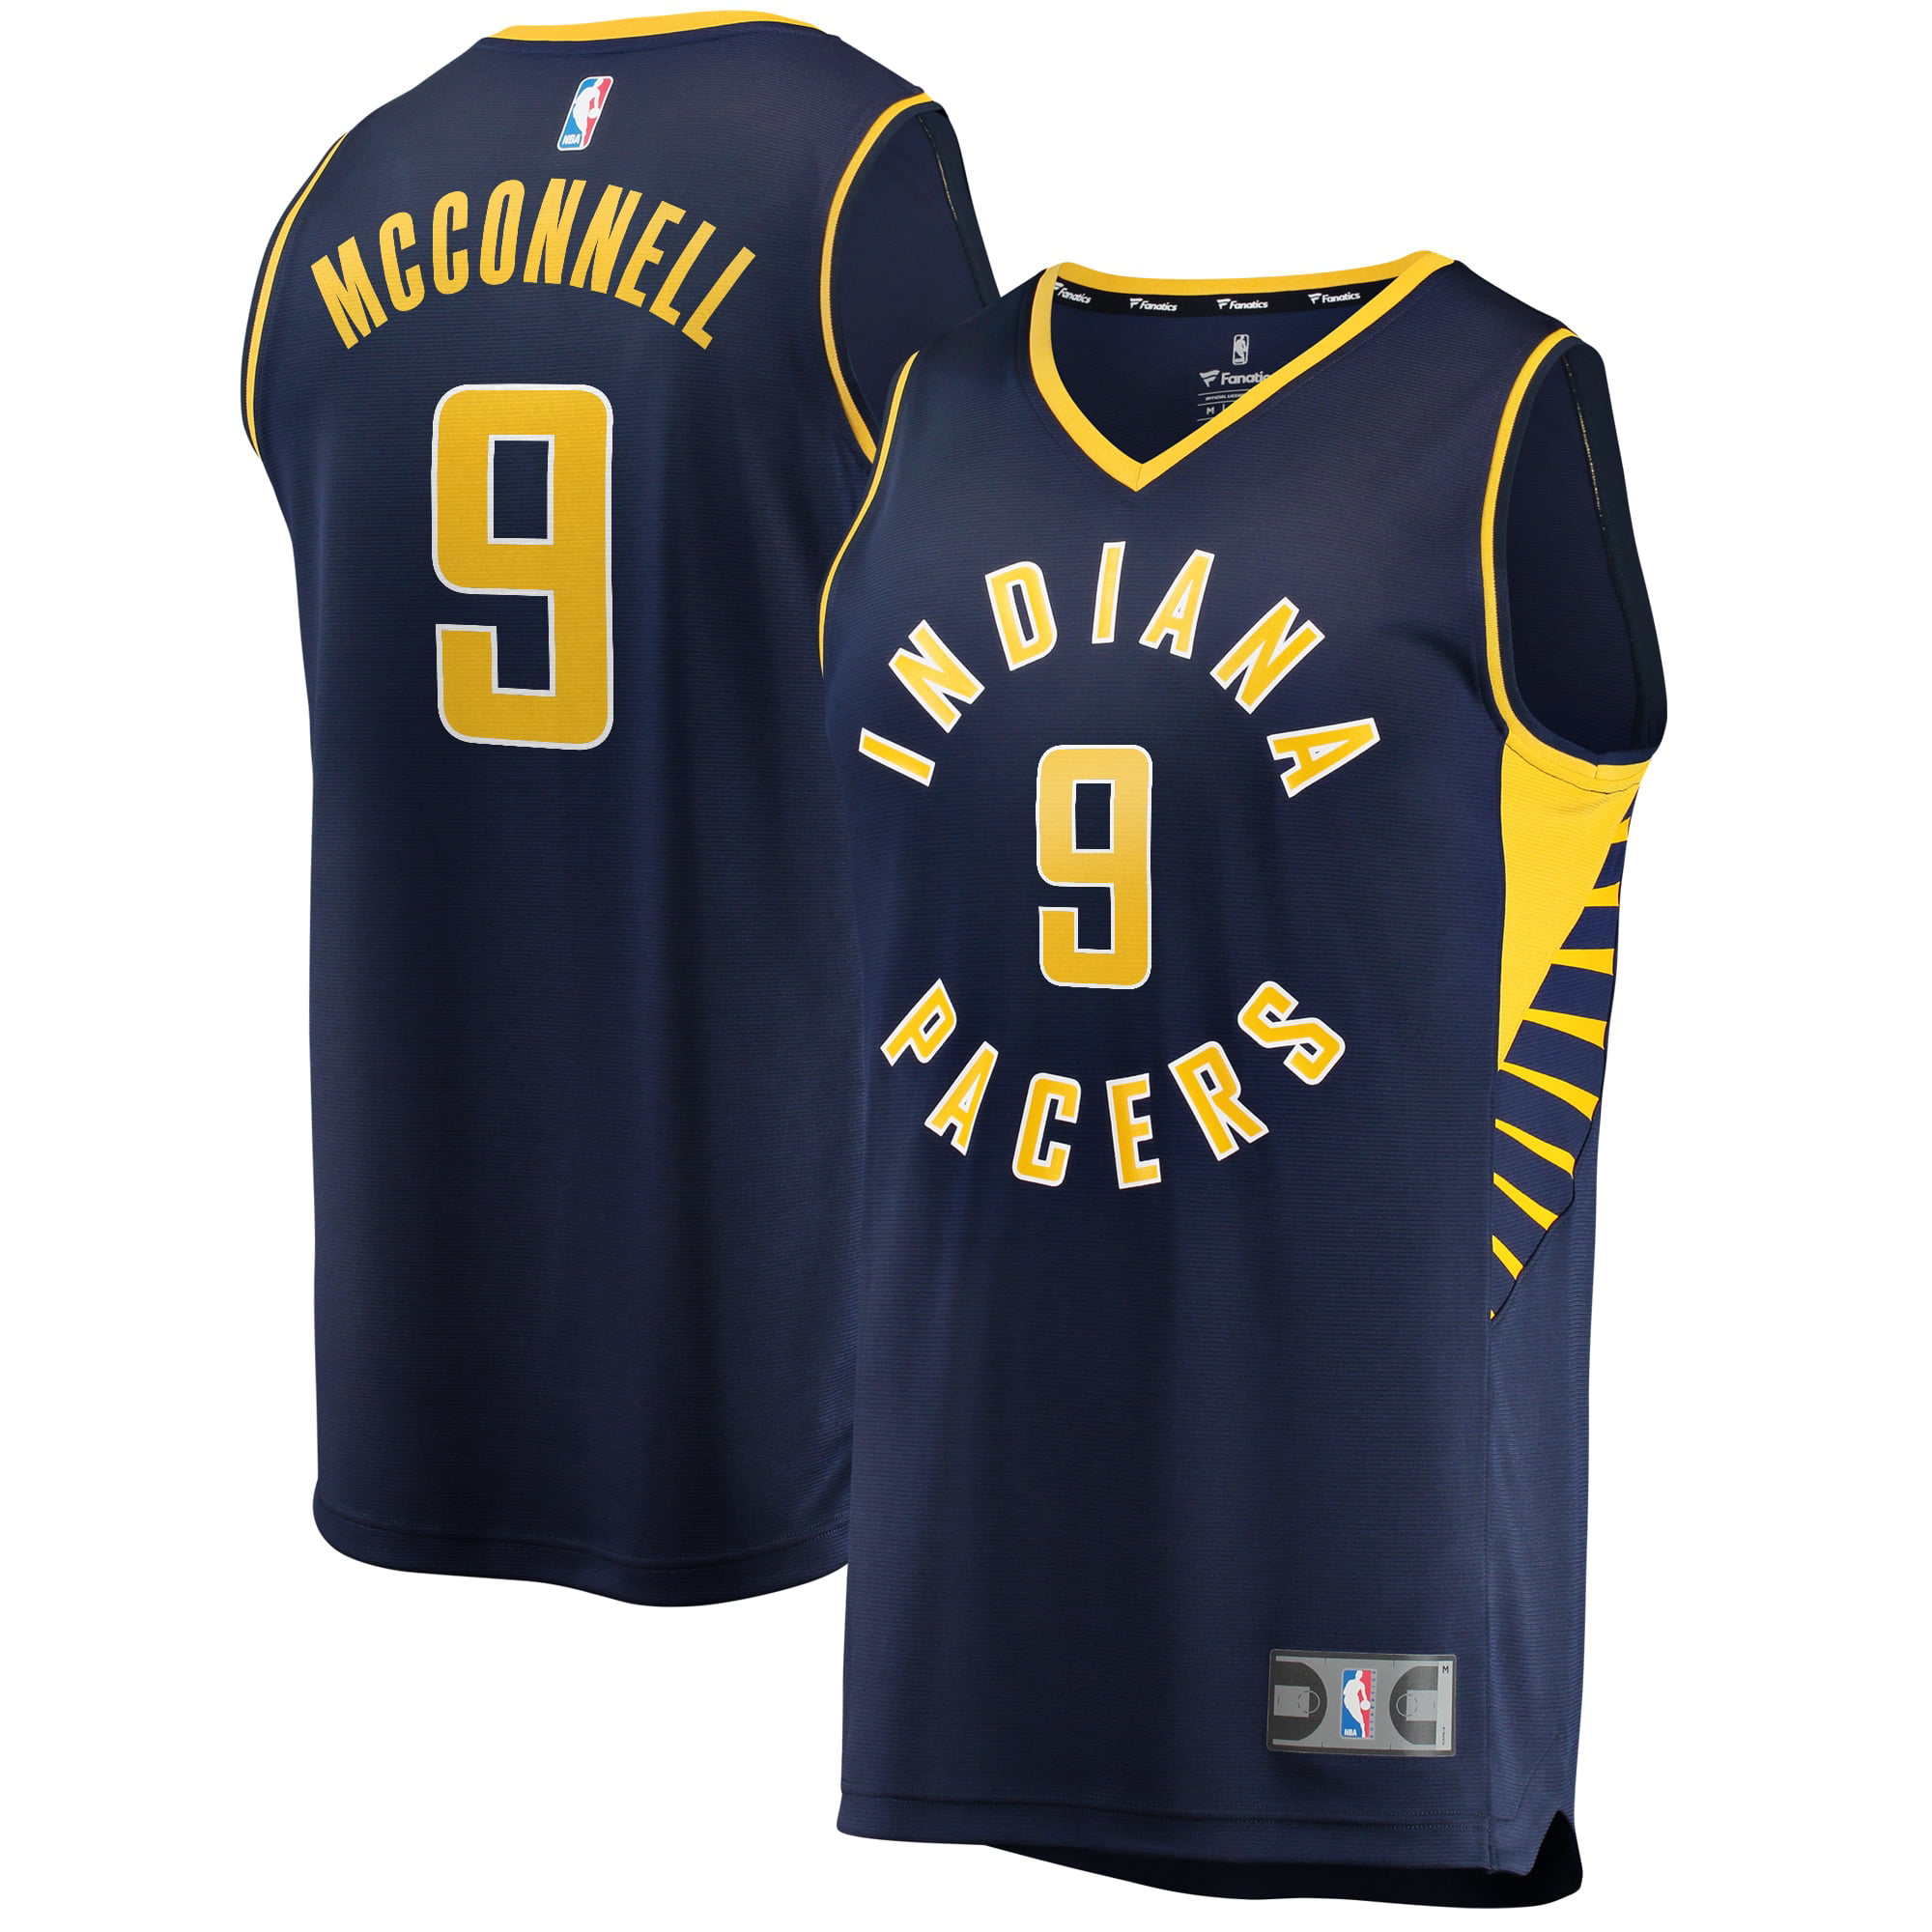 tj mcconnell pacers jersey